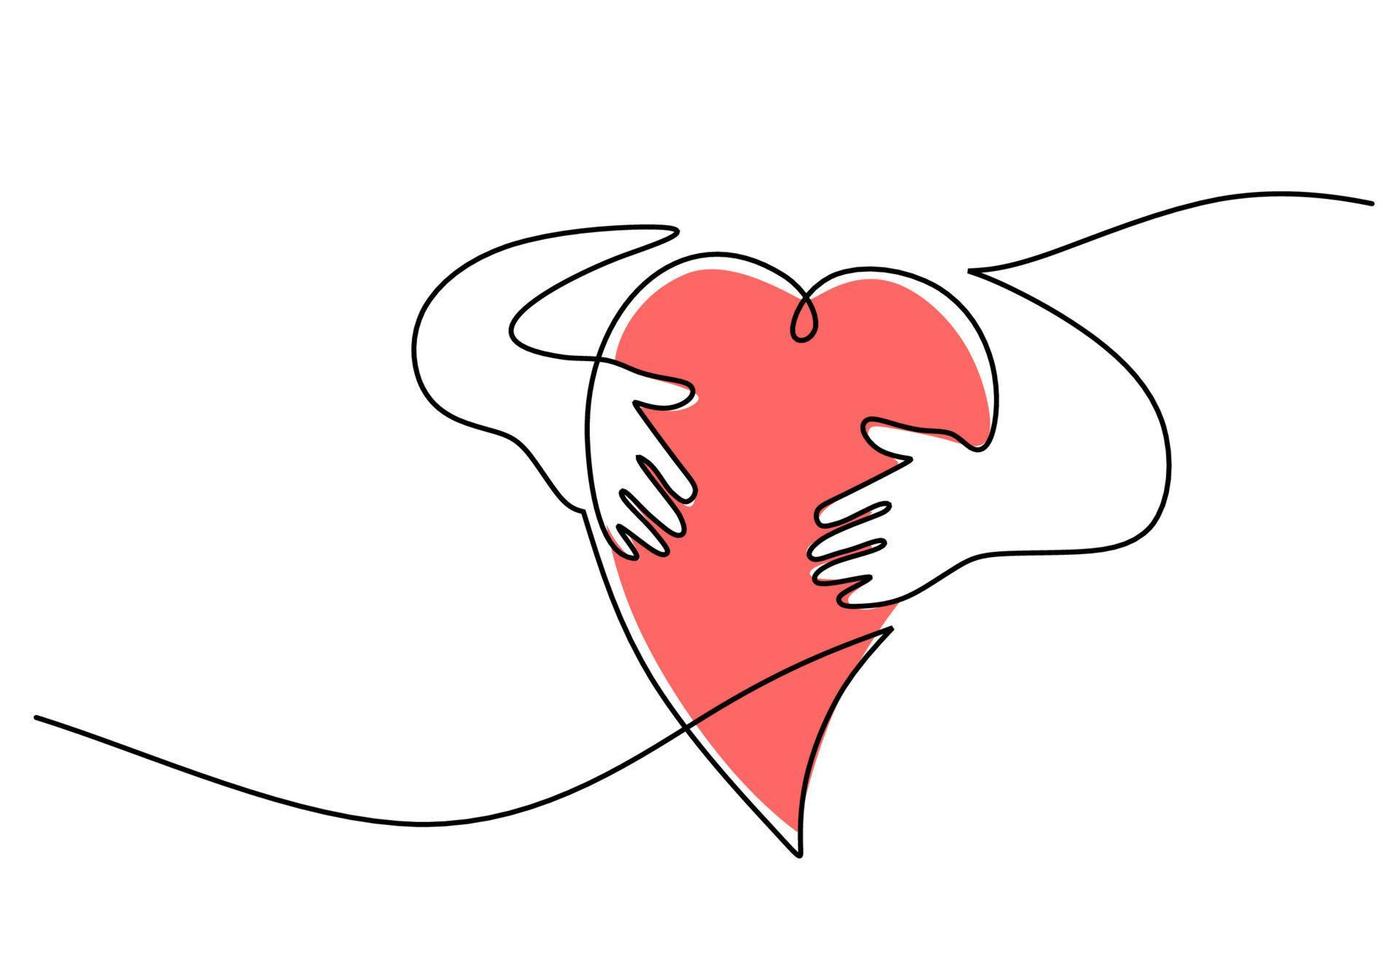 One continuous single line of hand hug love symbol vector